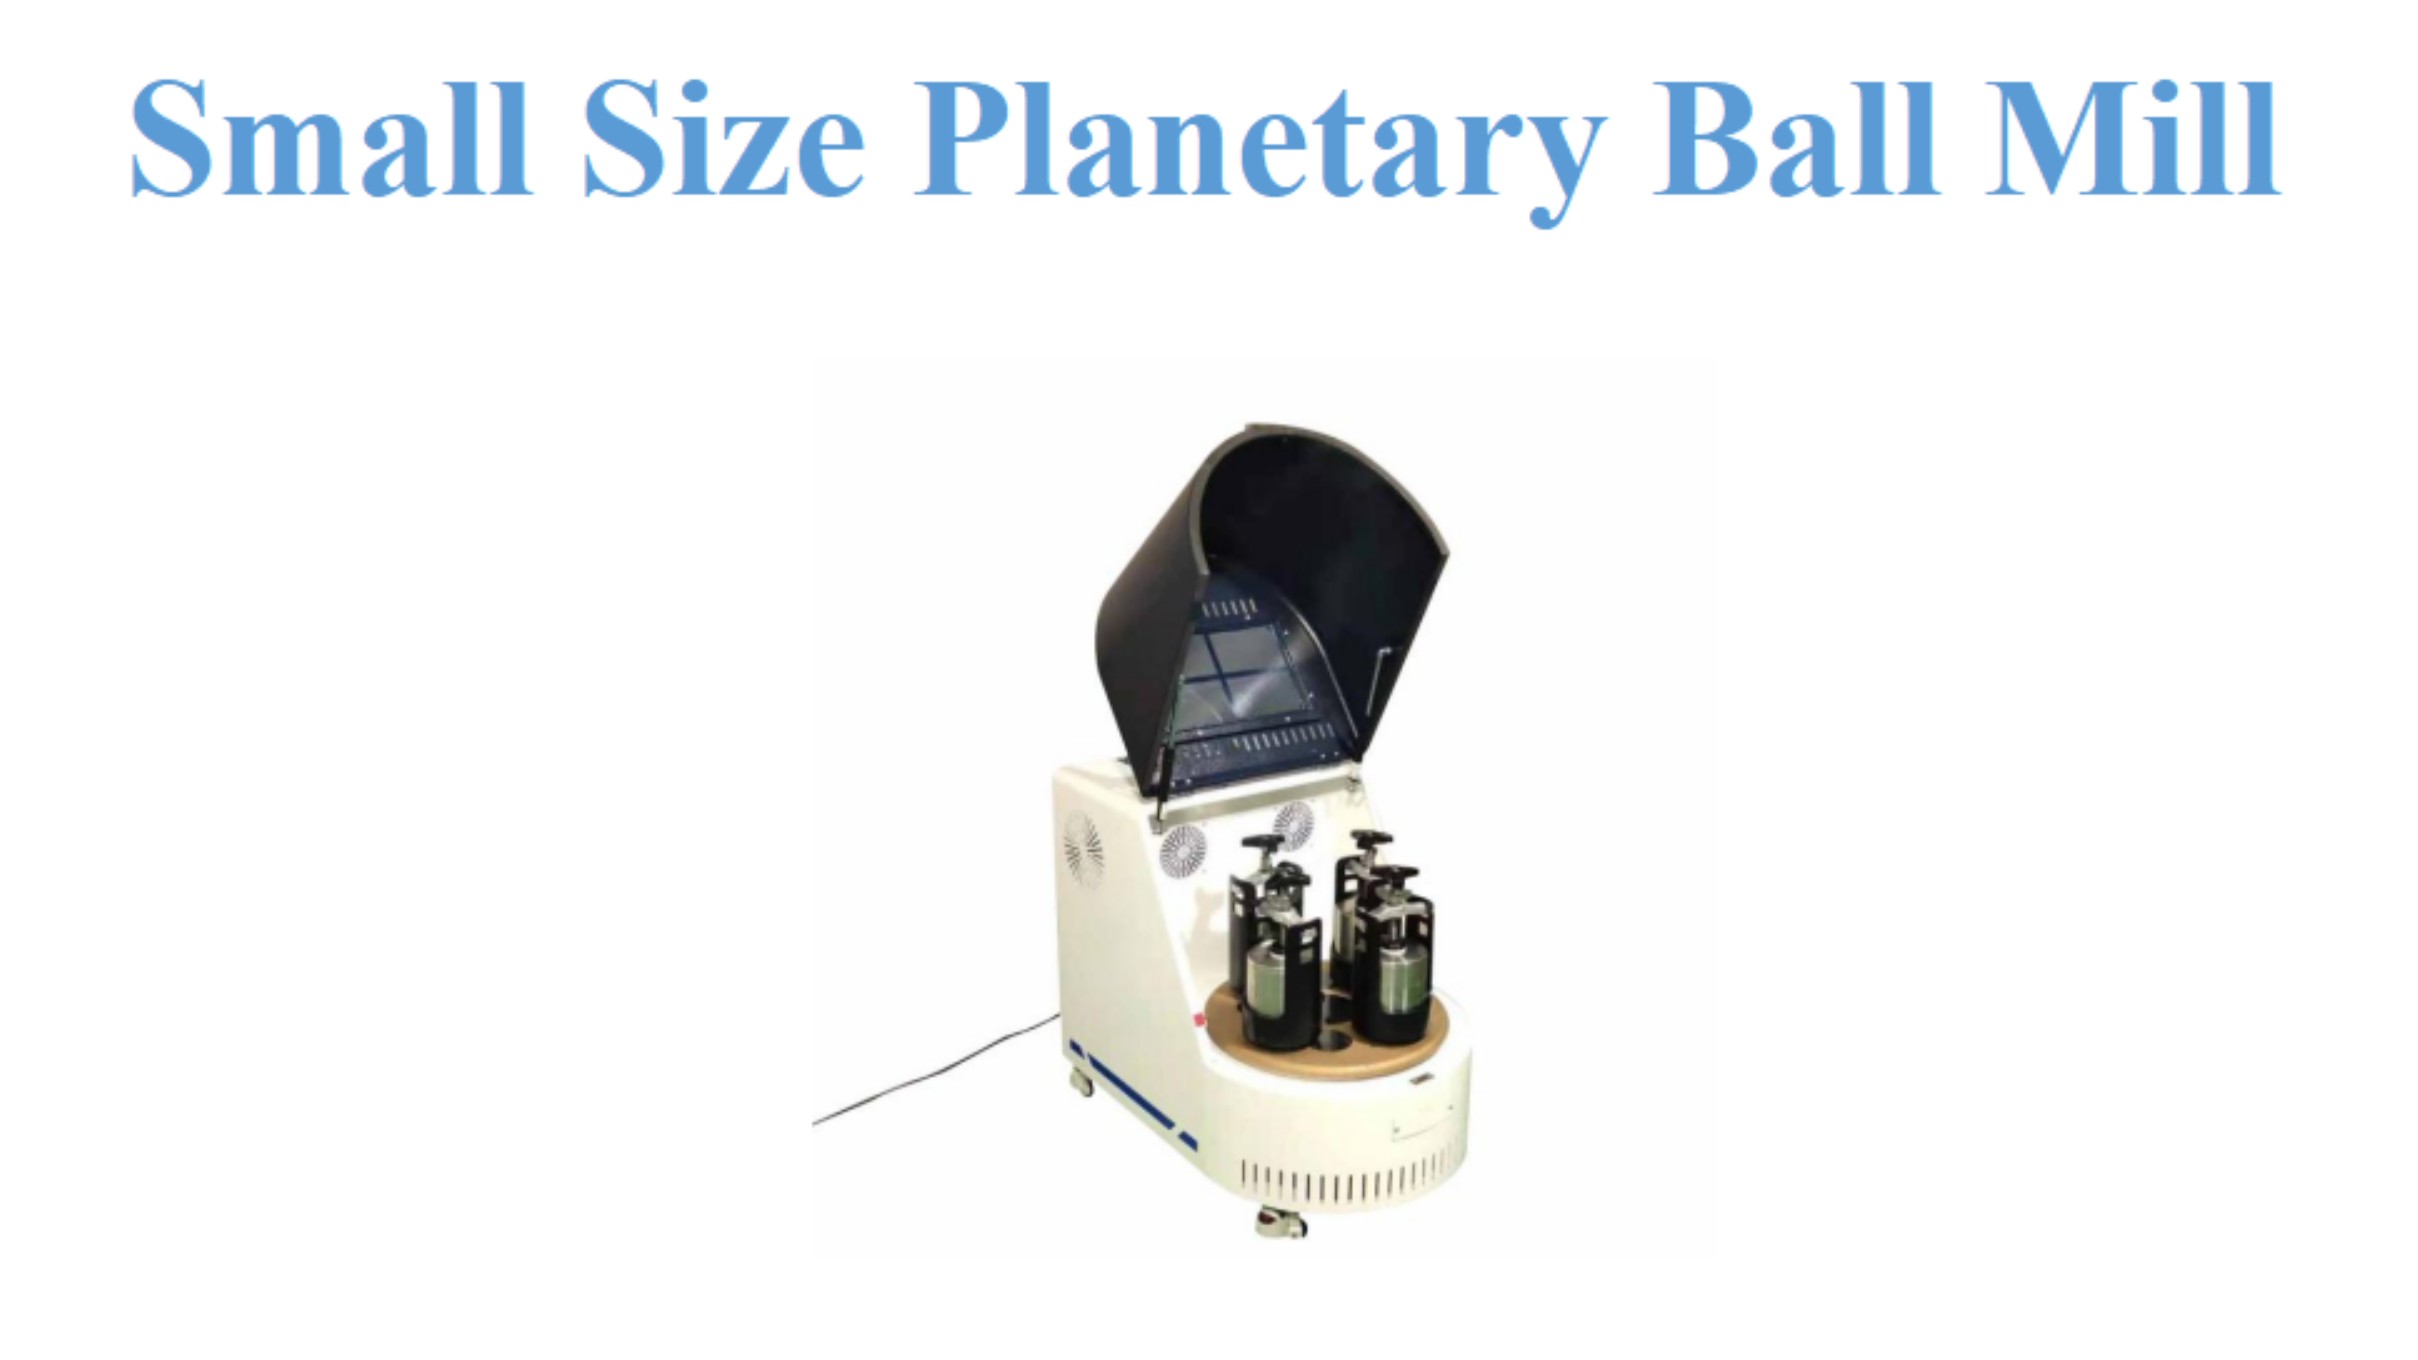 Small Size Planetary Ball Mill